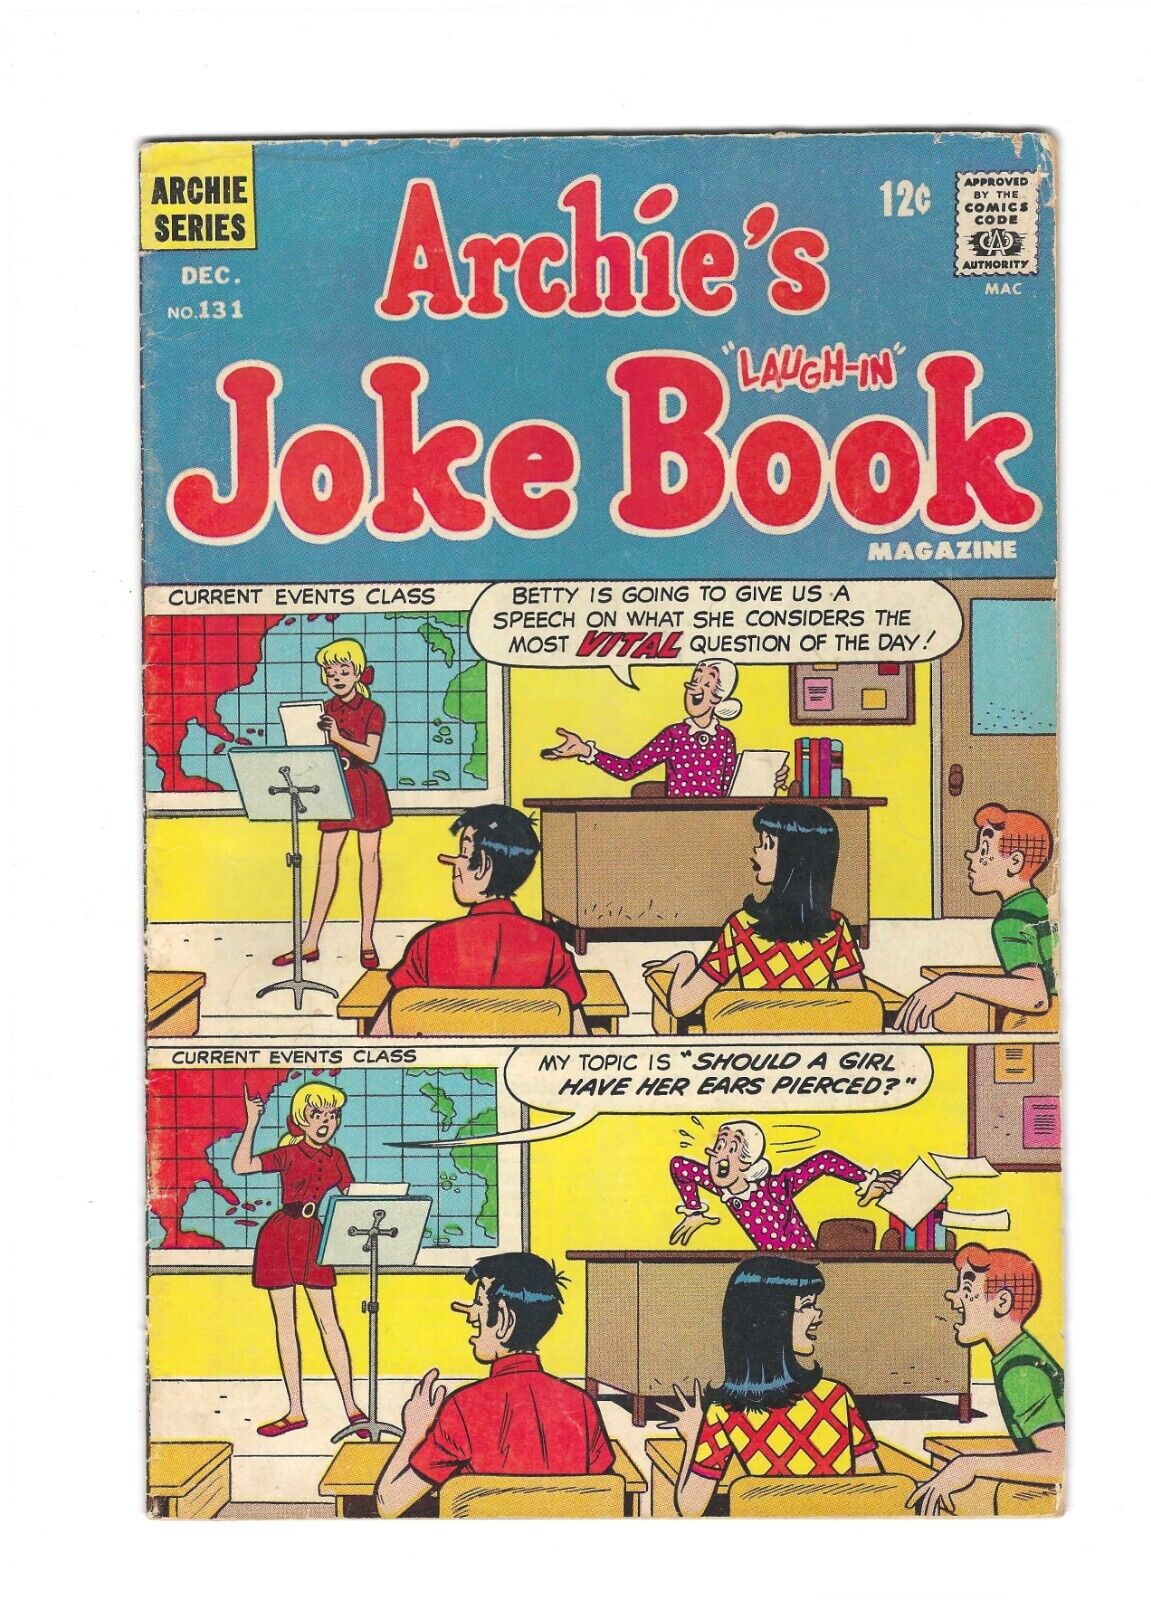 Archie's Joke Book Magazine #131: Dry Cleaned: Pressed: Bagged: Boarded: VG-FN 5